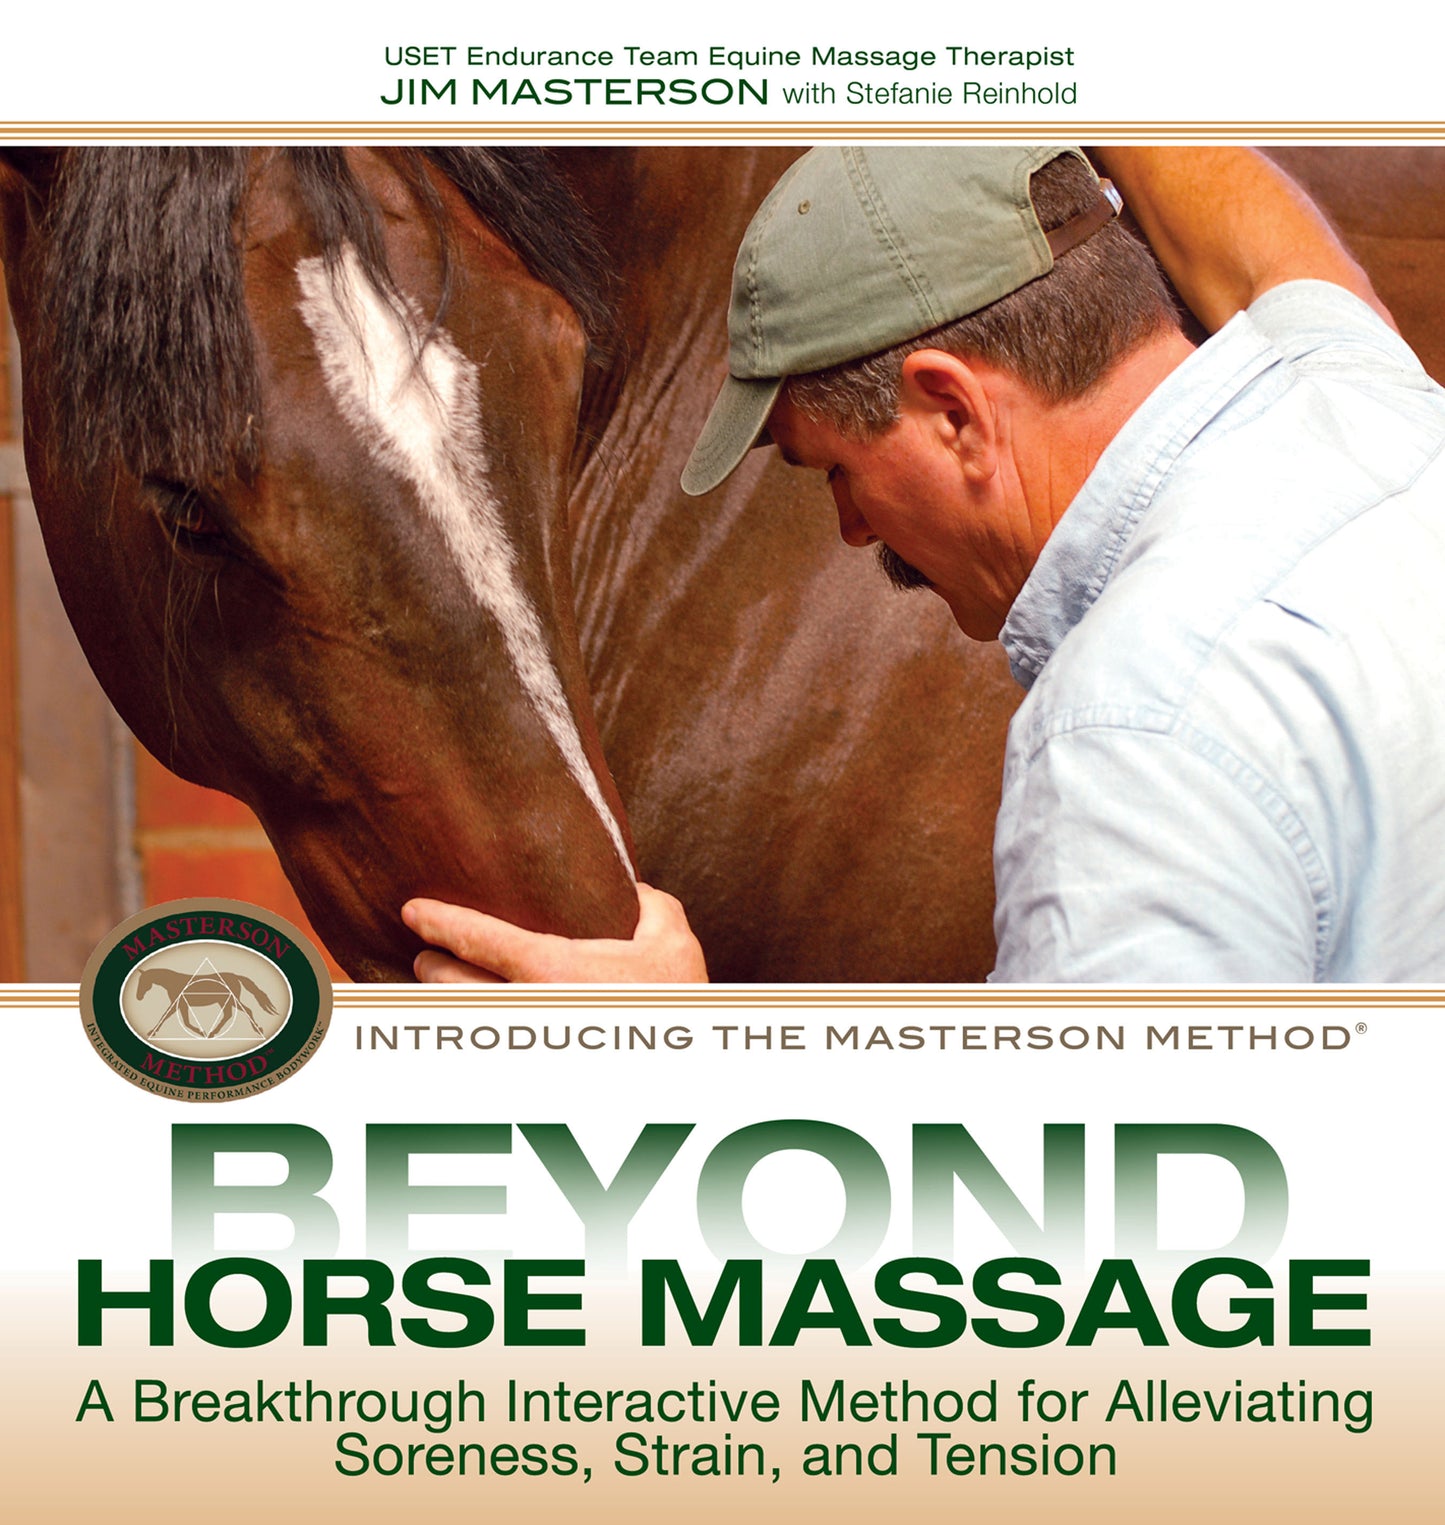 Beyond Horse Massage: A Breakthrough Interactive Method for Alleviating Soreness, Strain, and Tension Book Front Cover by Jim Masterson with Stefanie Reinhold Man's Profile with Brown Horse